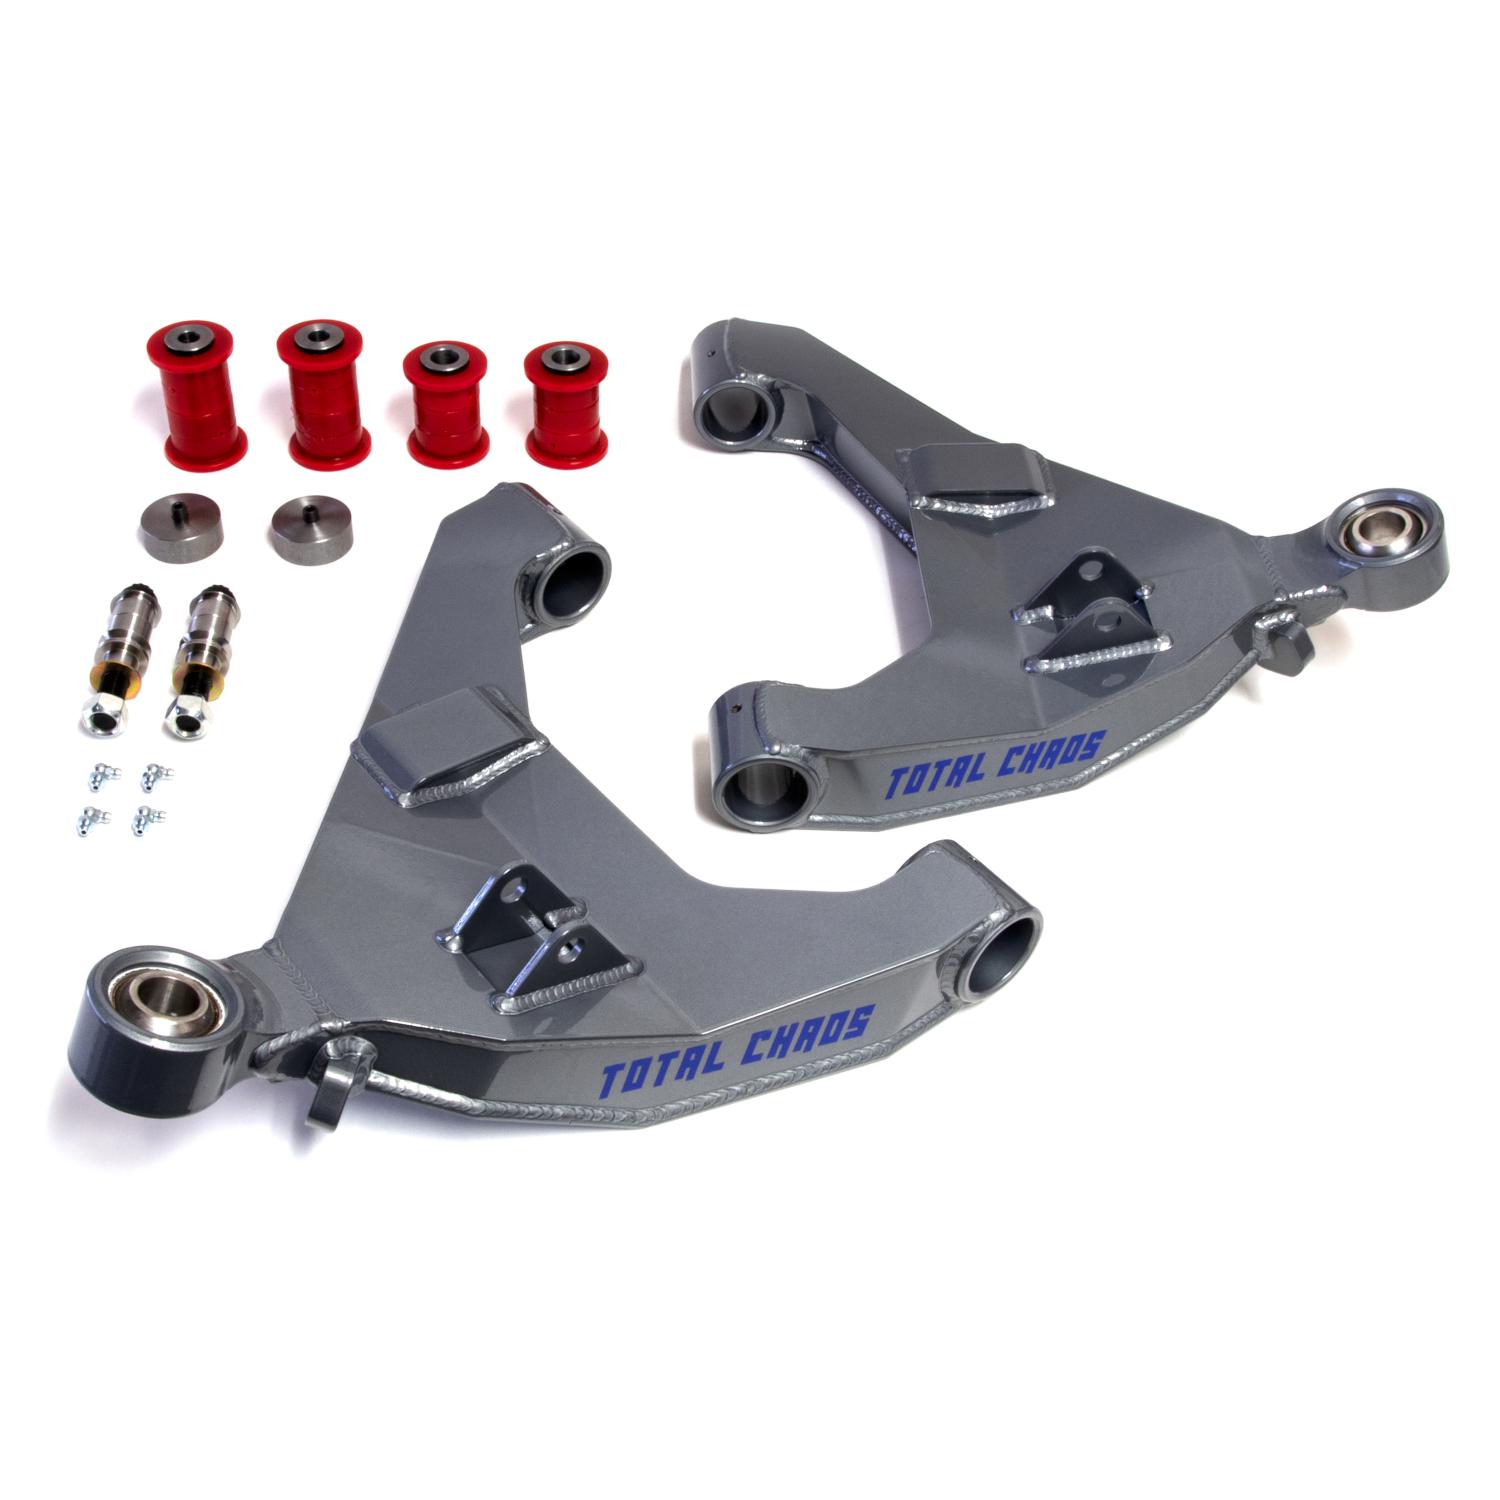 Total Chaos Stock Length 4130 Expedition Series Lower Control Arms - No Secondary Shock Mounts 2010-2014 FJ Cruiser - Click Image to Close